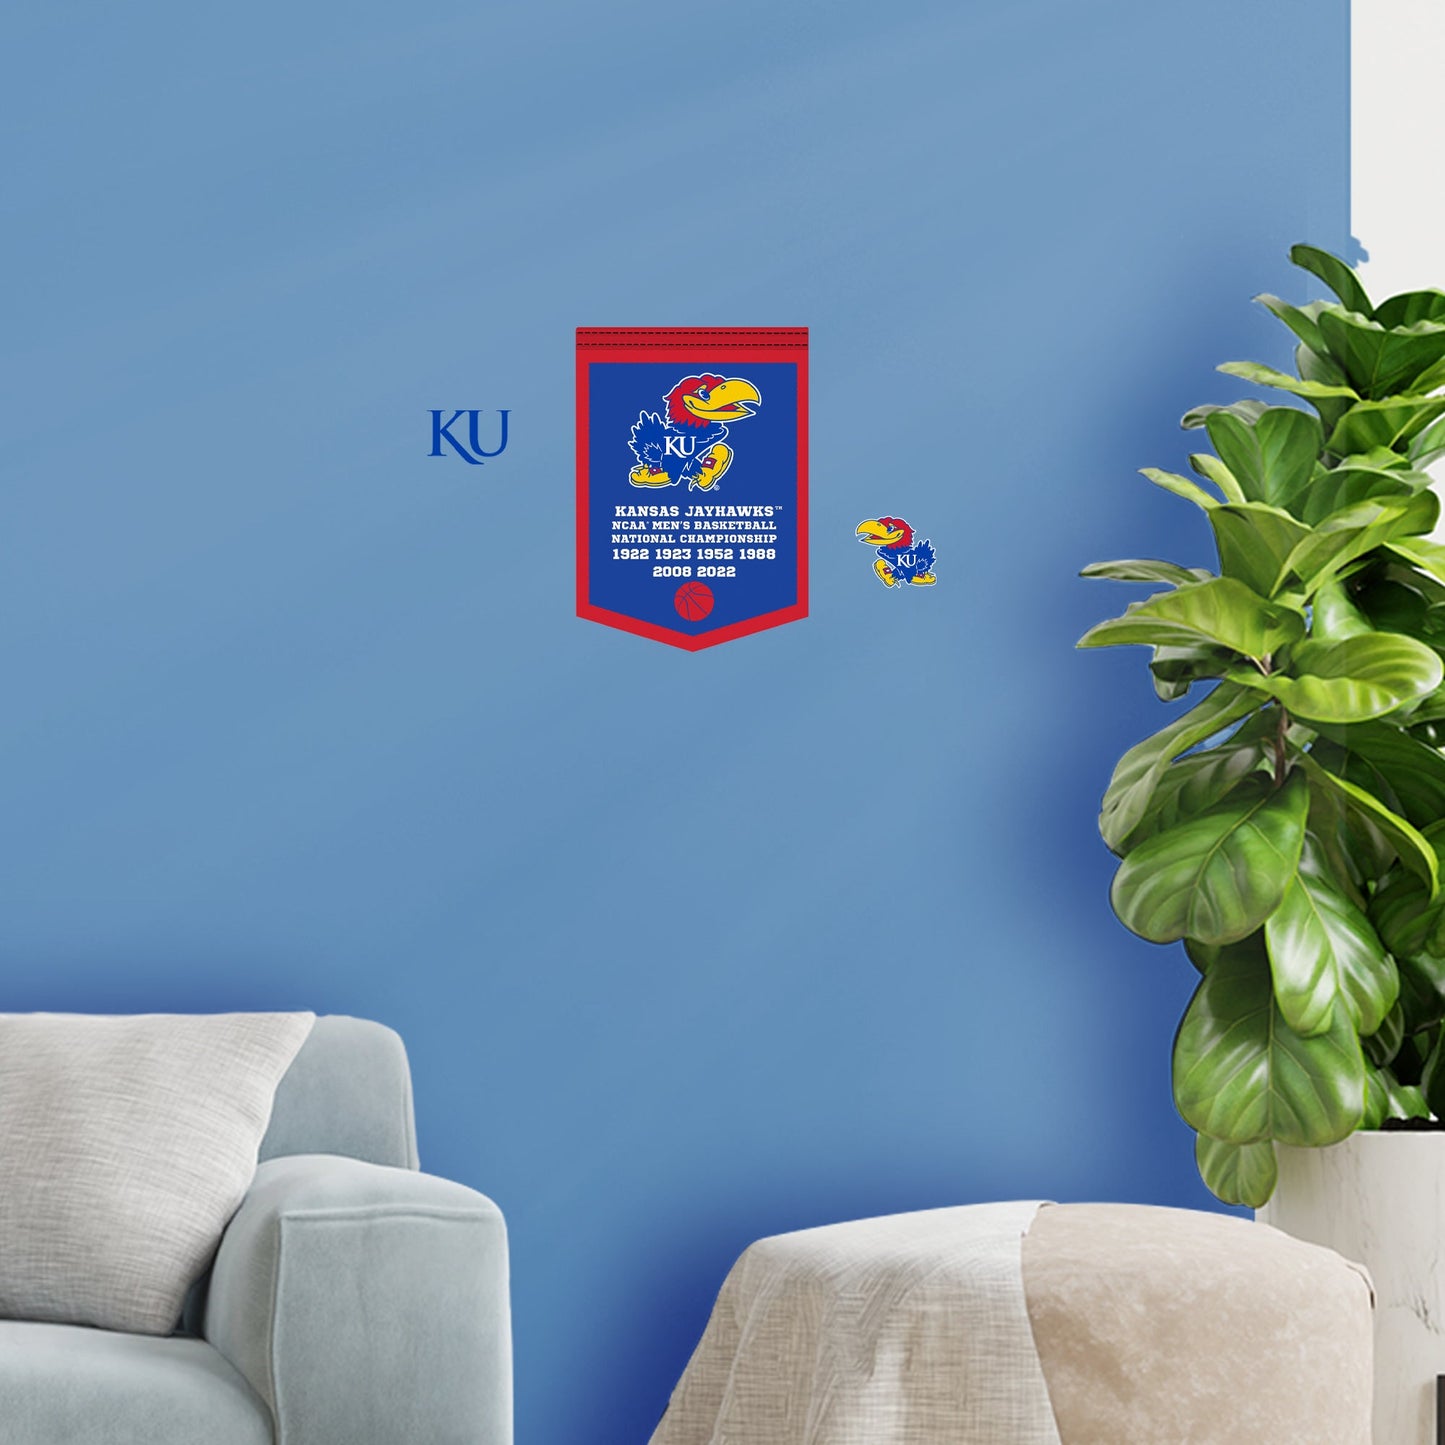 Kansas Jayhawks: 2022 Basketball Championships Banner - Officially Licensed NCAA Removable Adhesive Decal